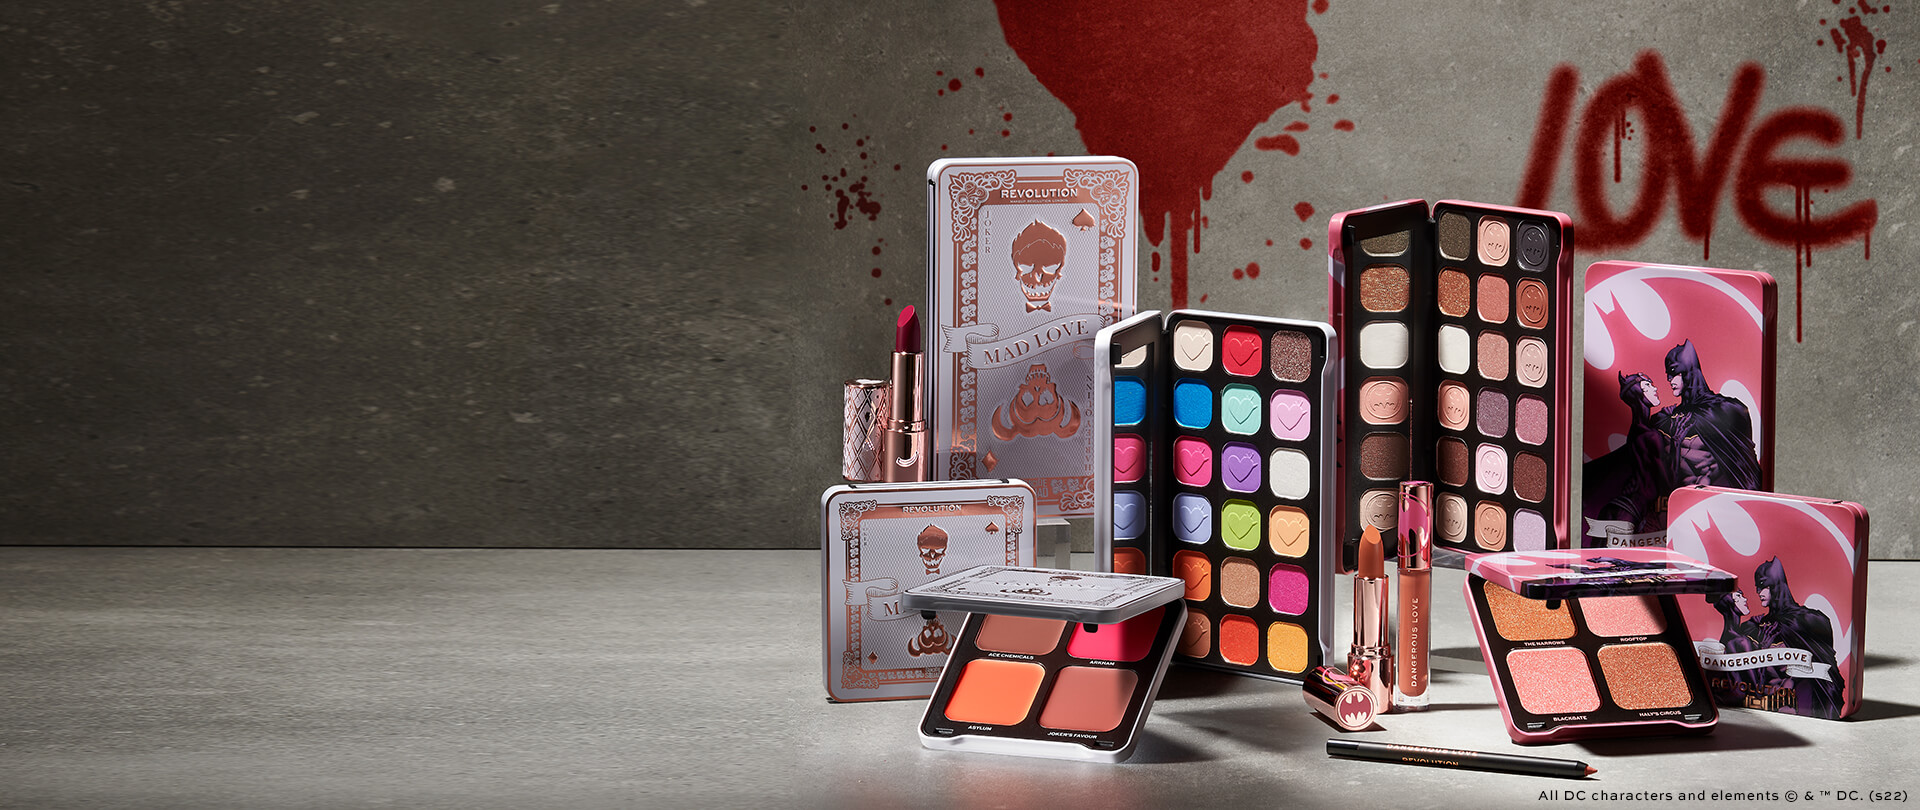 Revolution Beauty Launches New DC Comics Make Up Collection - Dark Knight  News